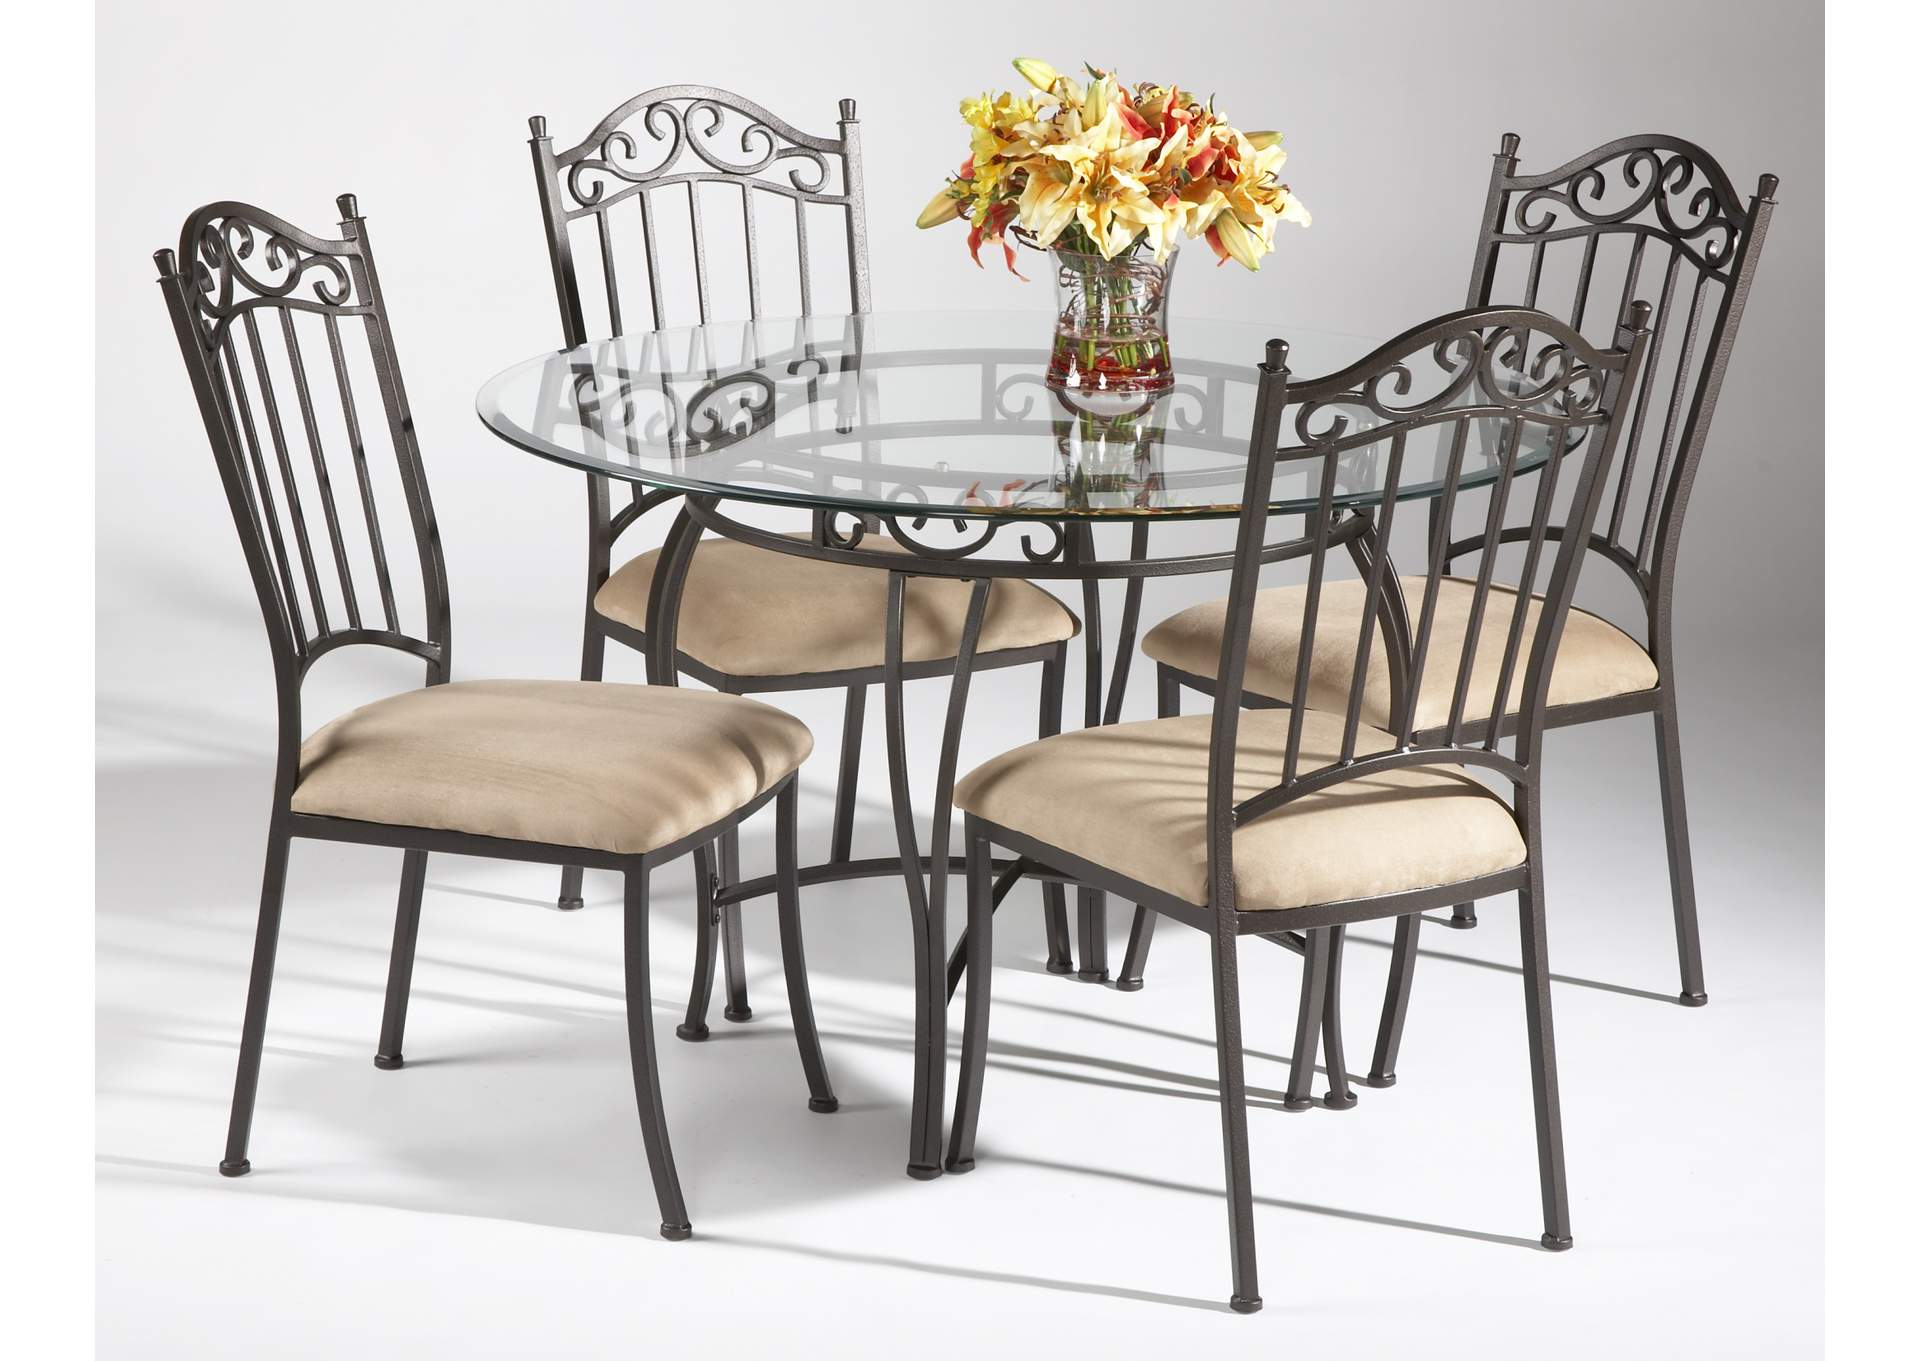 Antique Taupe Transitional Style Dining, Iron Dining Table And Chairs